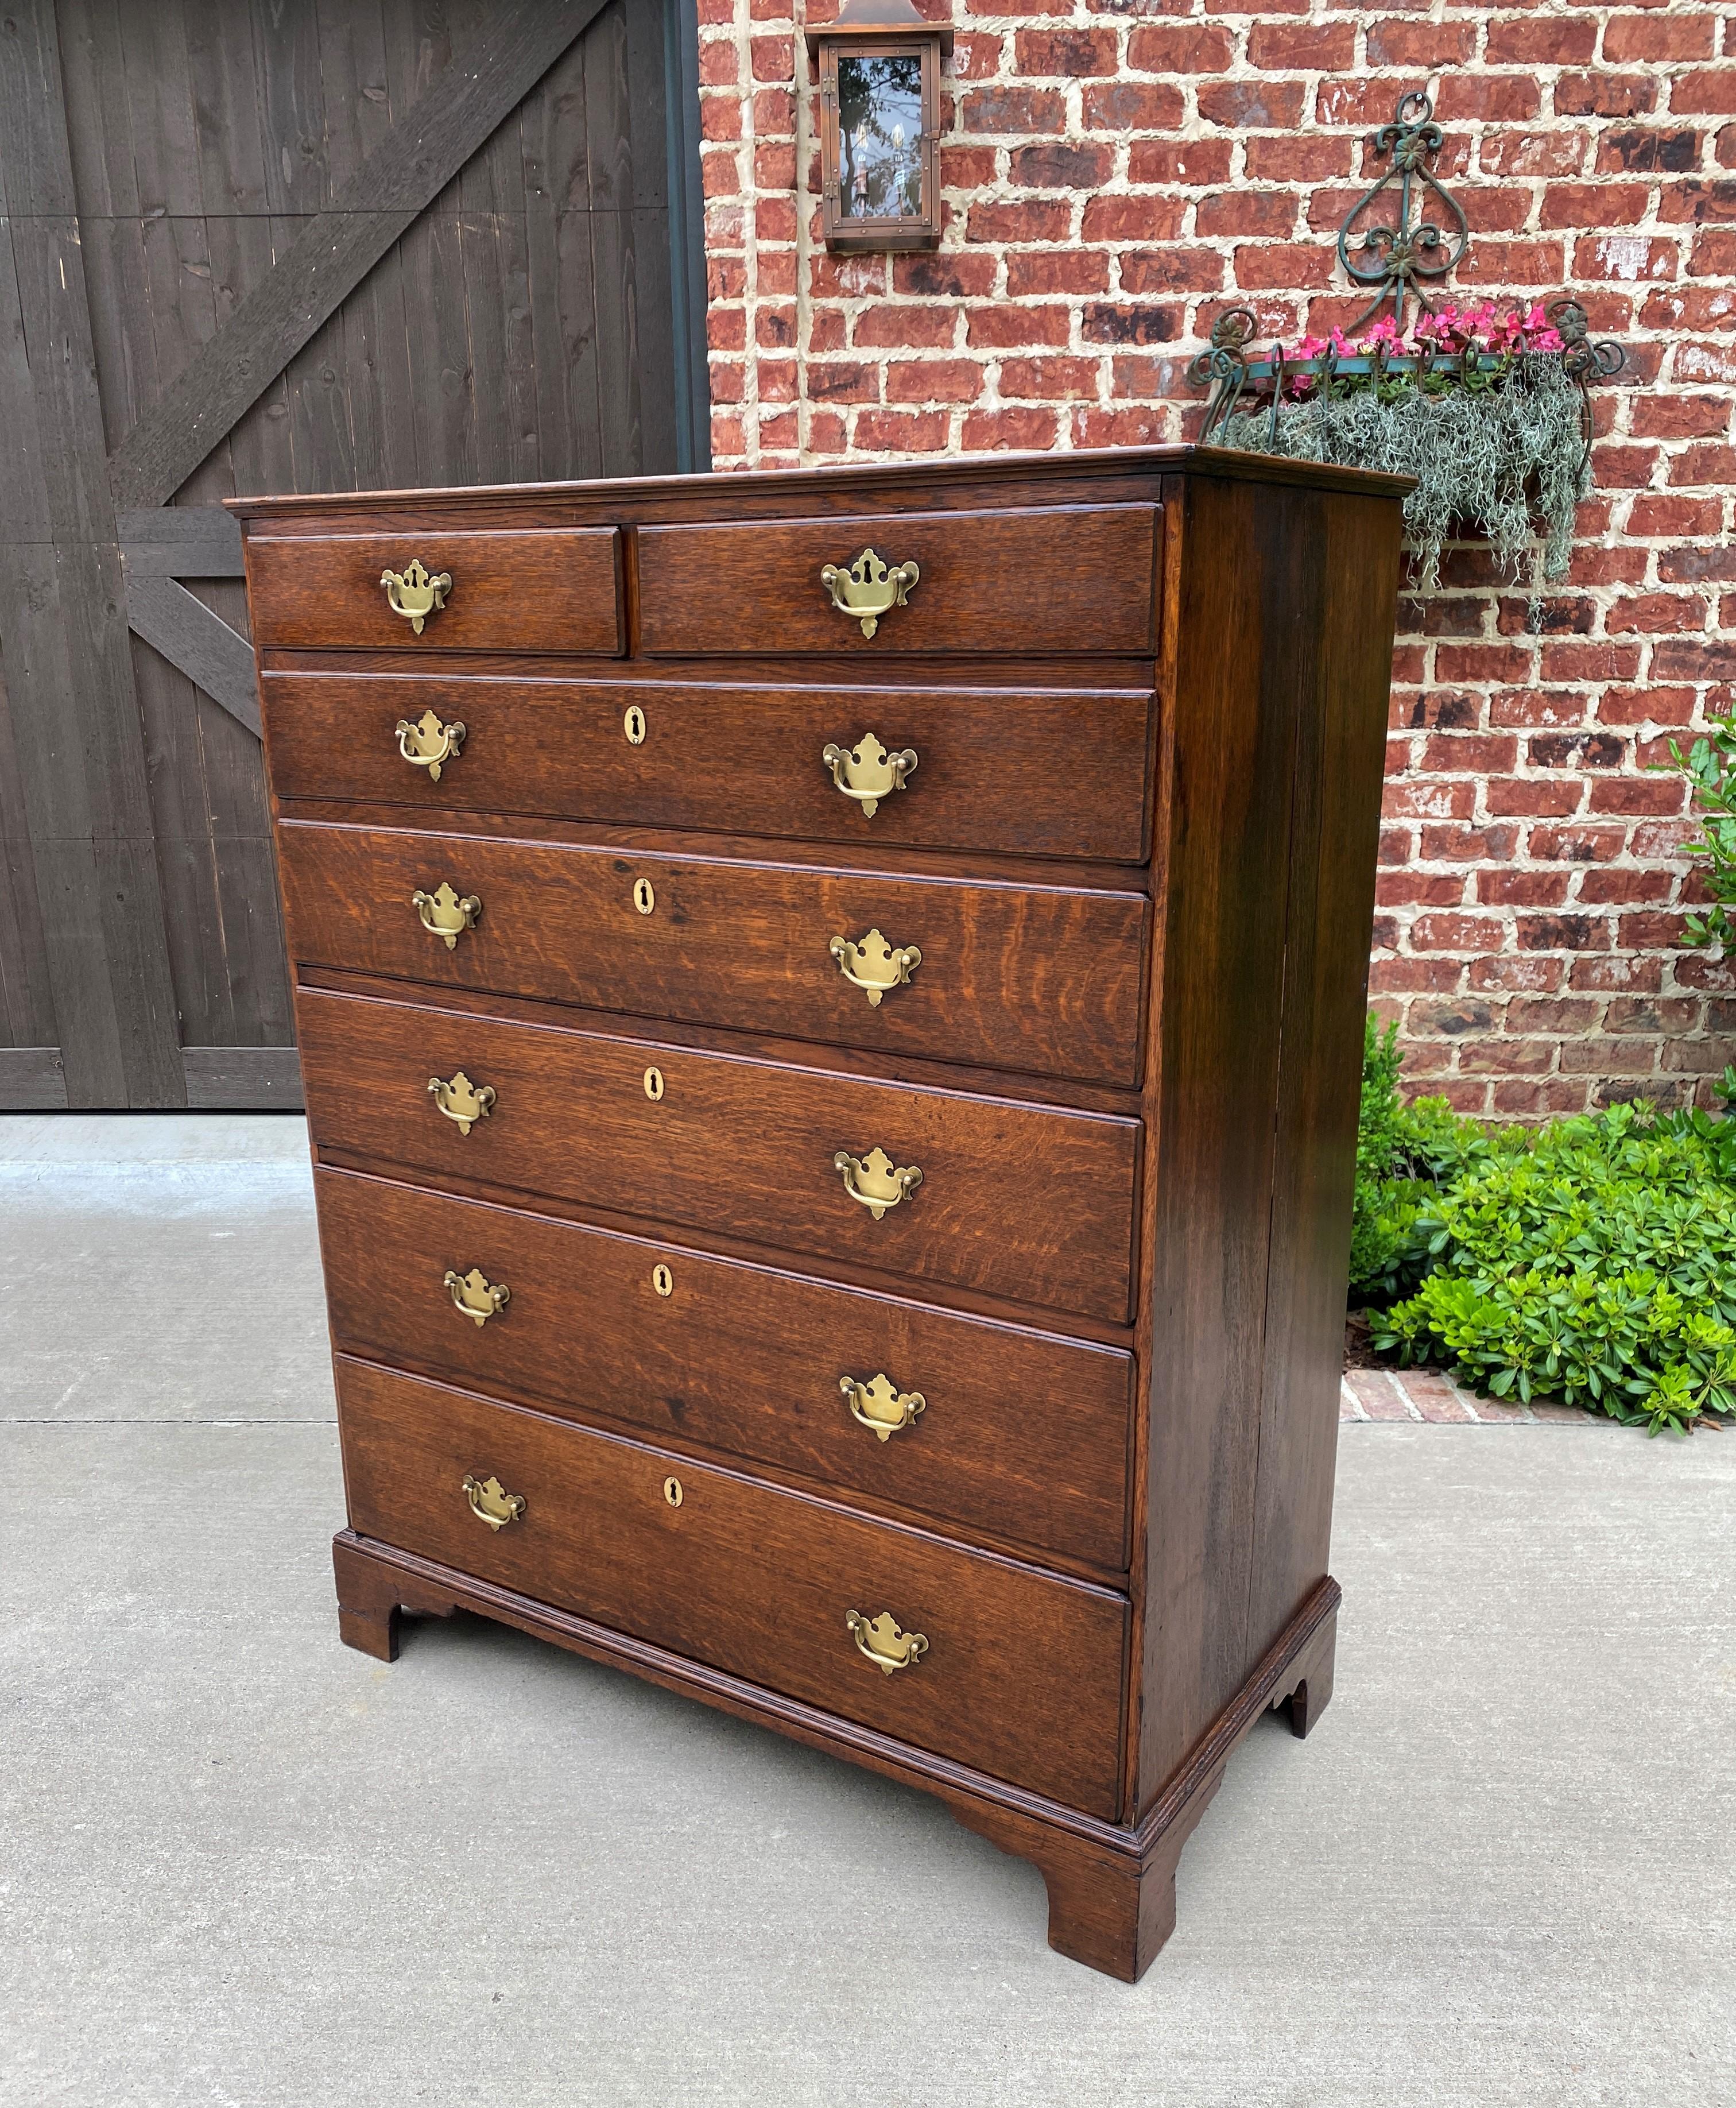 EXQUISITE Antique English Oak 19th Century Georgian Style Chest of 7 Drawers~~c. 1840s-1860s

 A MUST HAVE~~gorgeous example of a 19th century English chest of drawers~~7 drawers with original brass bat wing pulls and escutcheons ~~carved bracket